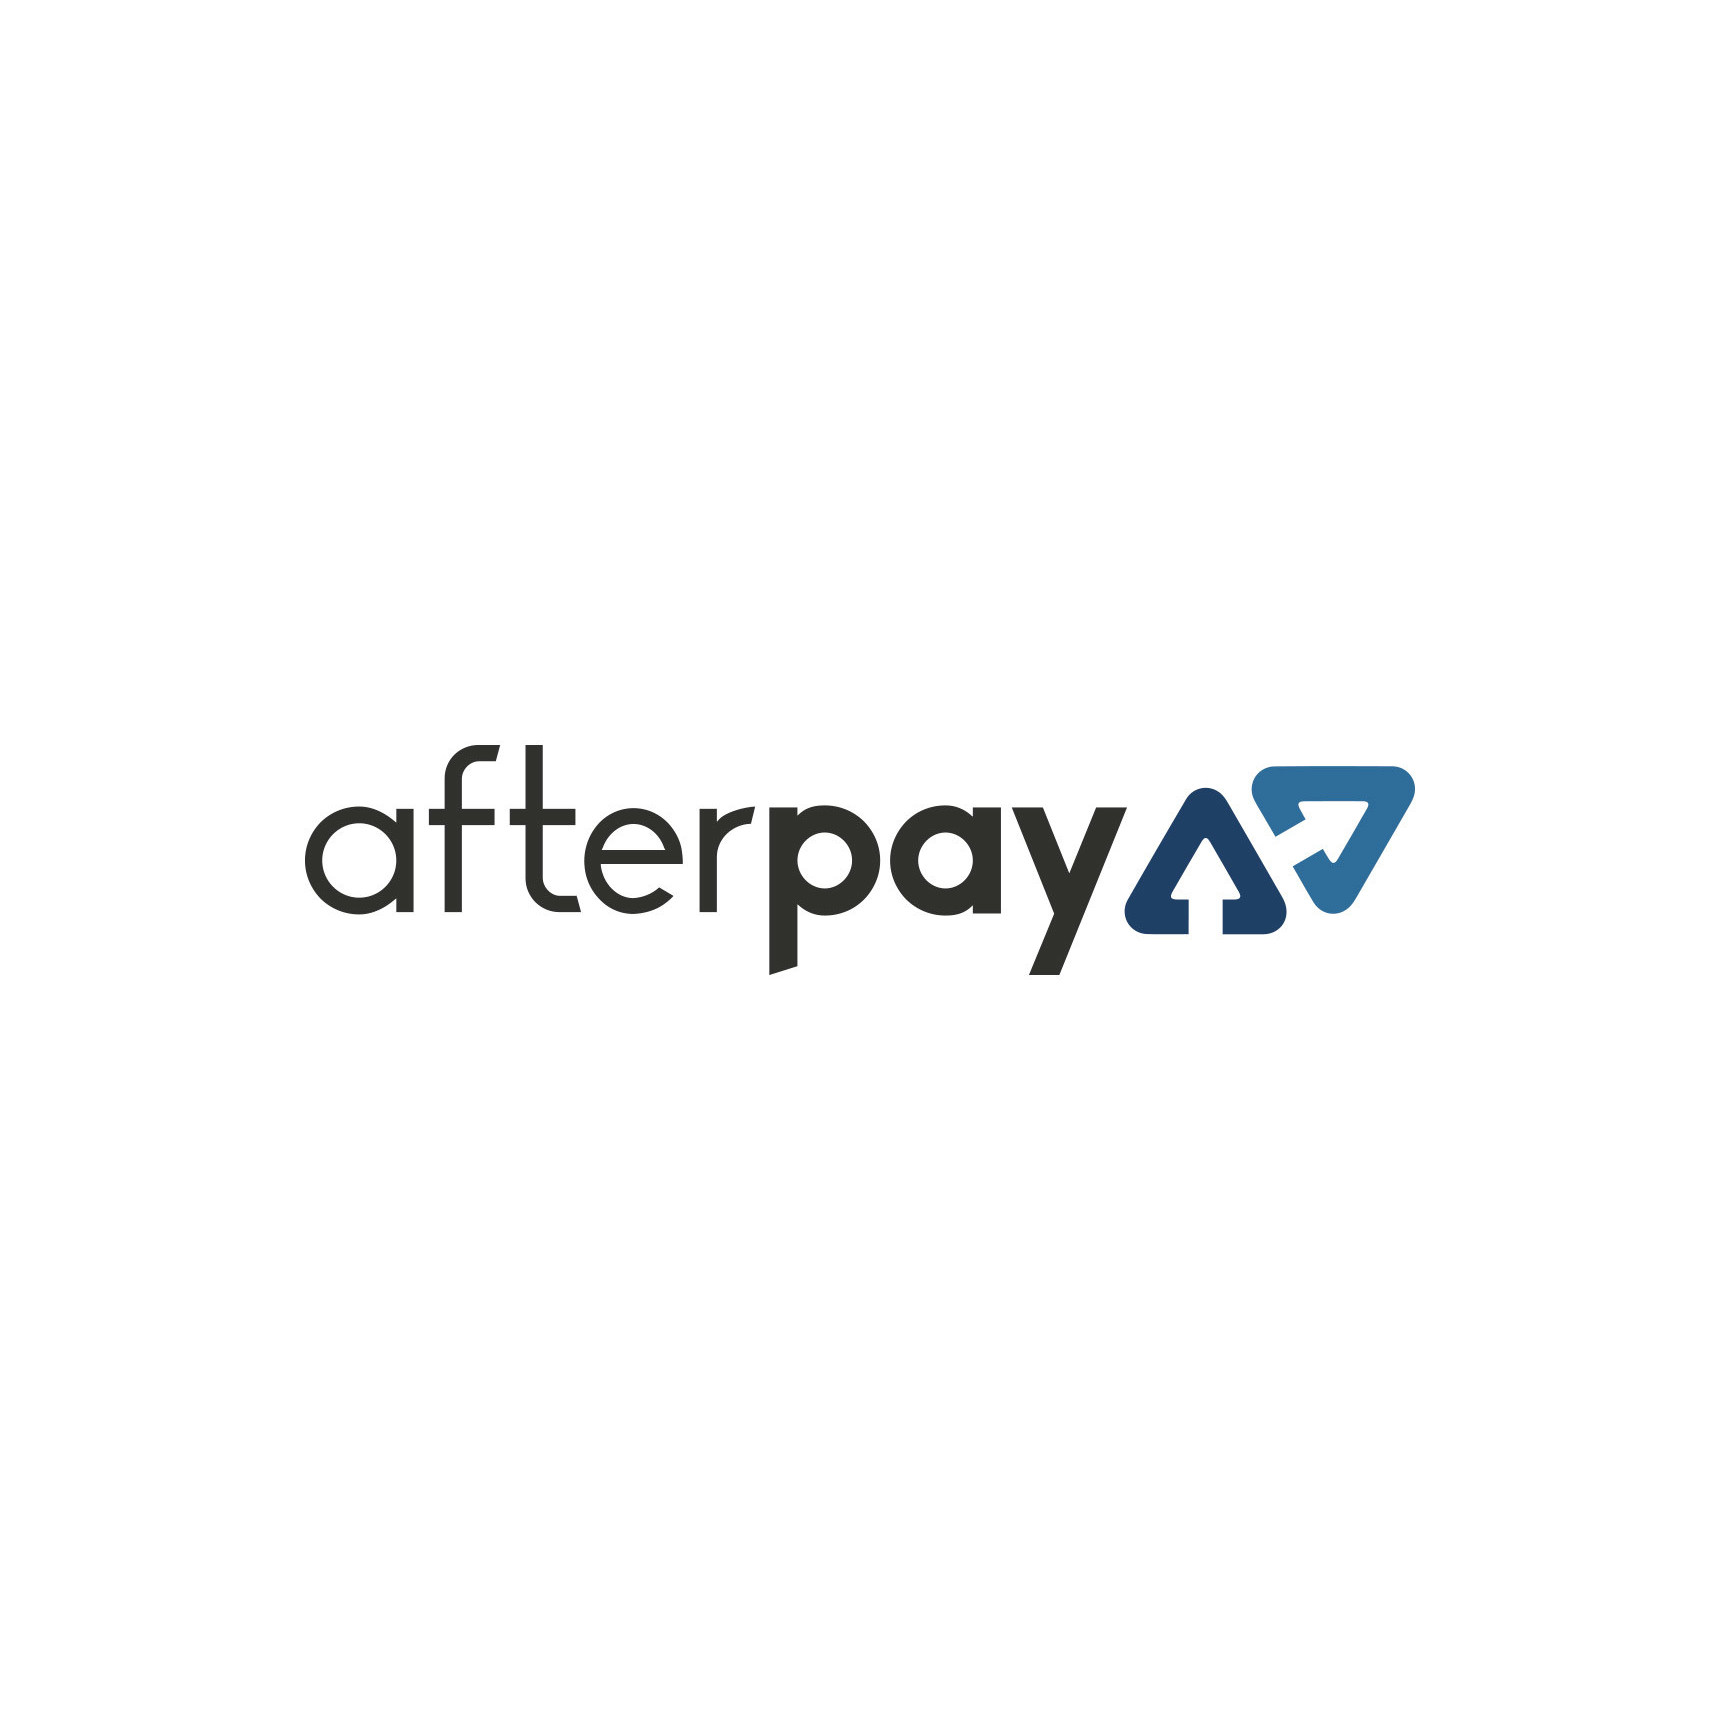 Converse Afterpay On Sale, Save 46% 